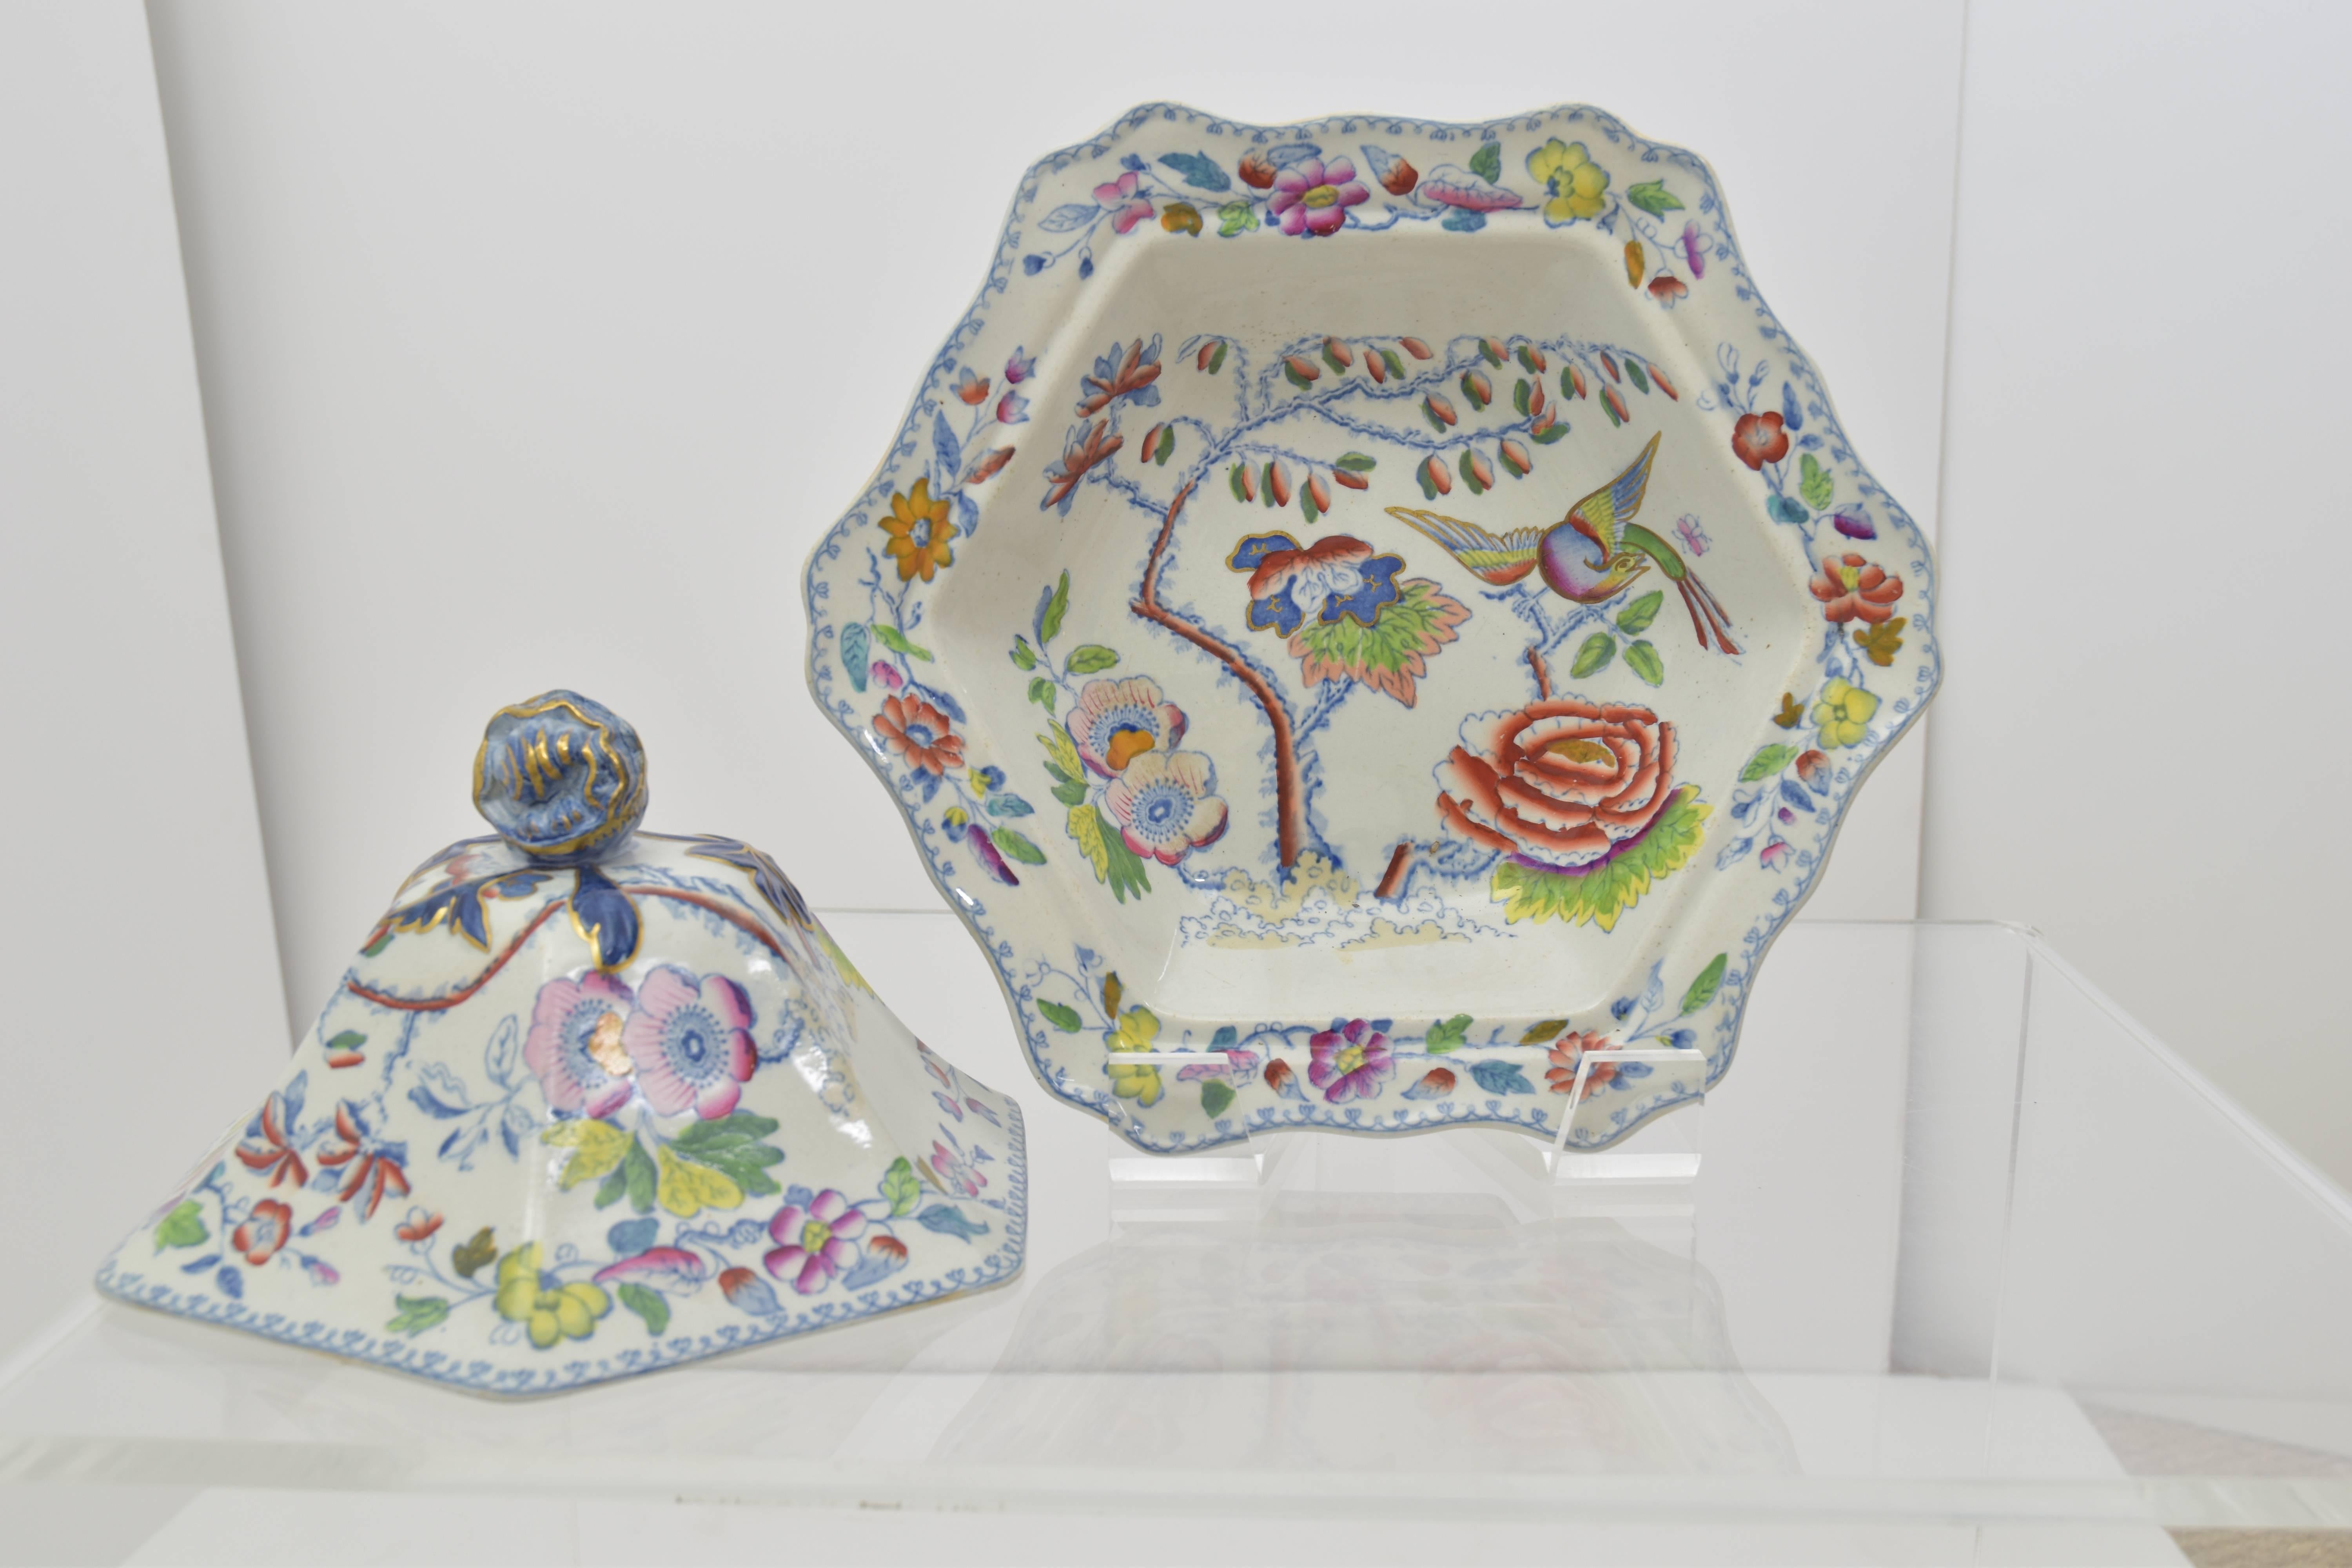 Beautiful antique ironstone covered vegetable dish with a domed lid with flying bird and floral decoration.